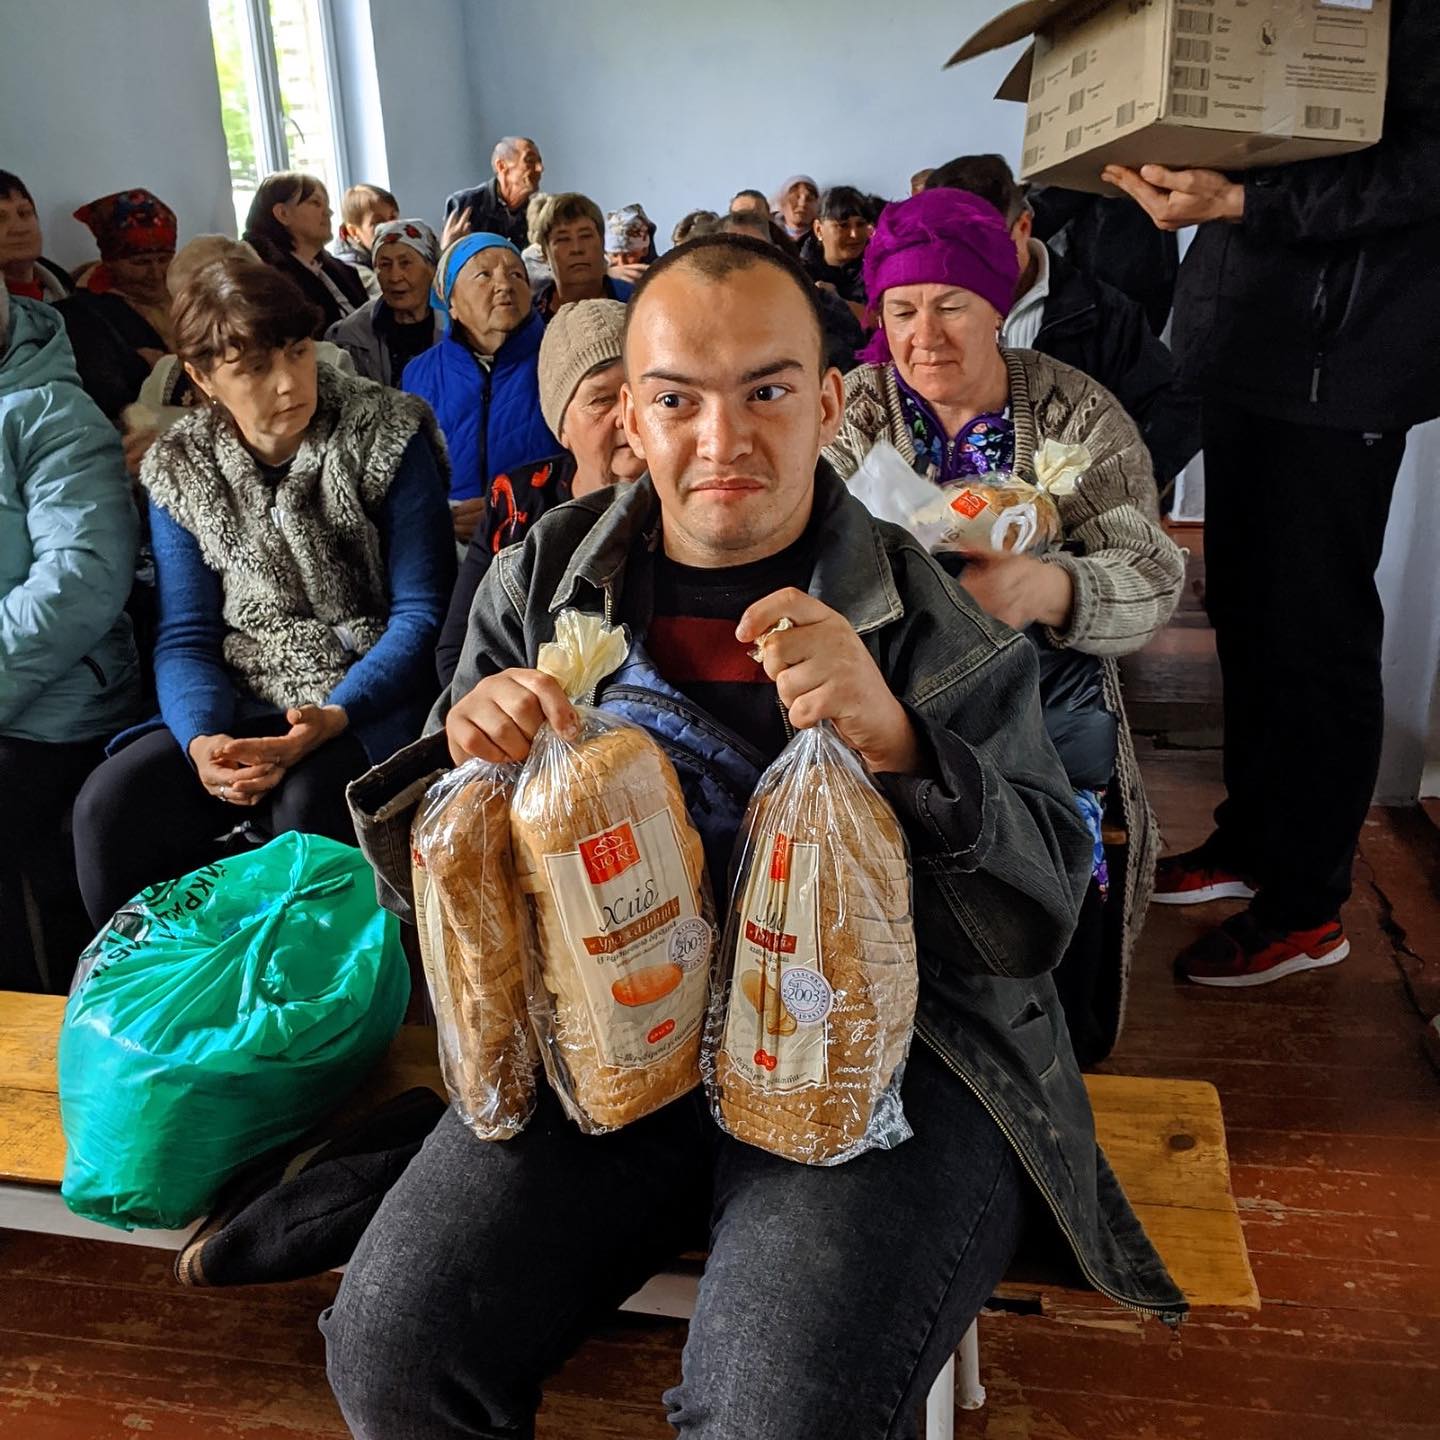 A young man sits on a bench holding two loaves of bread, surrounded by a group of seated displaced Ukrainians in a room.